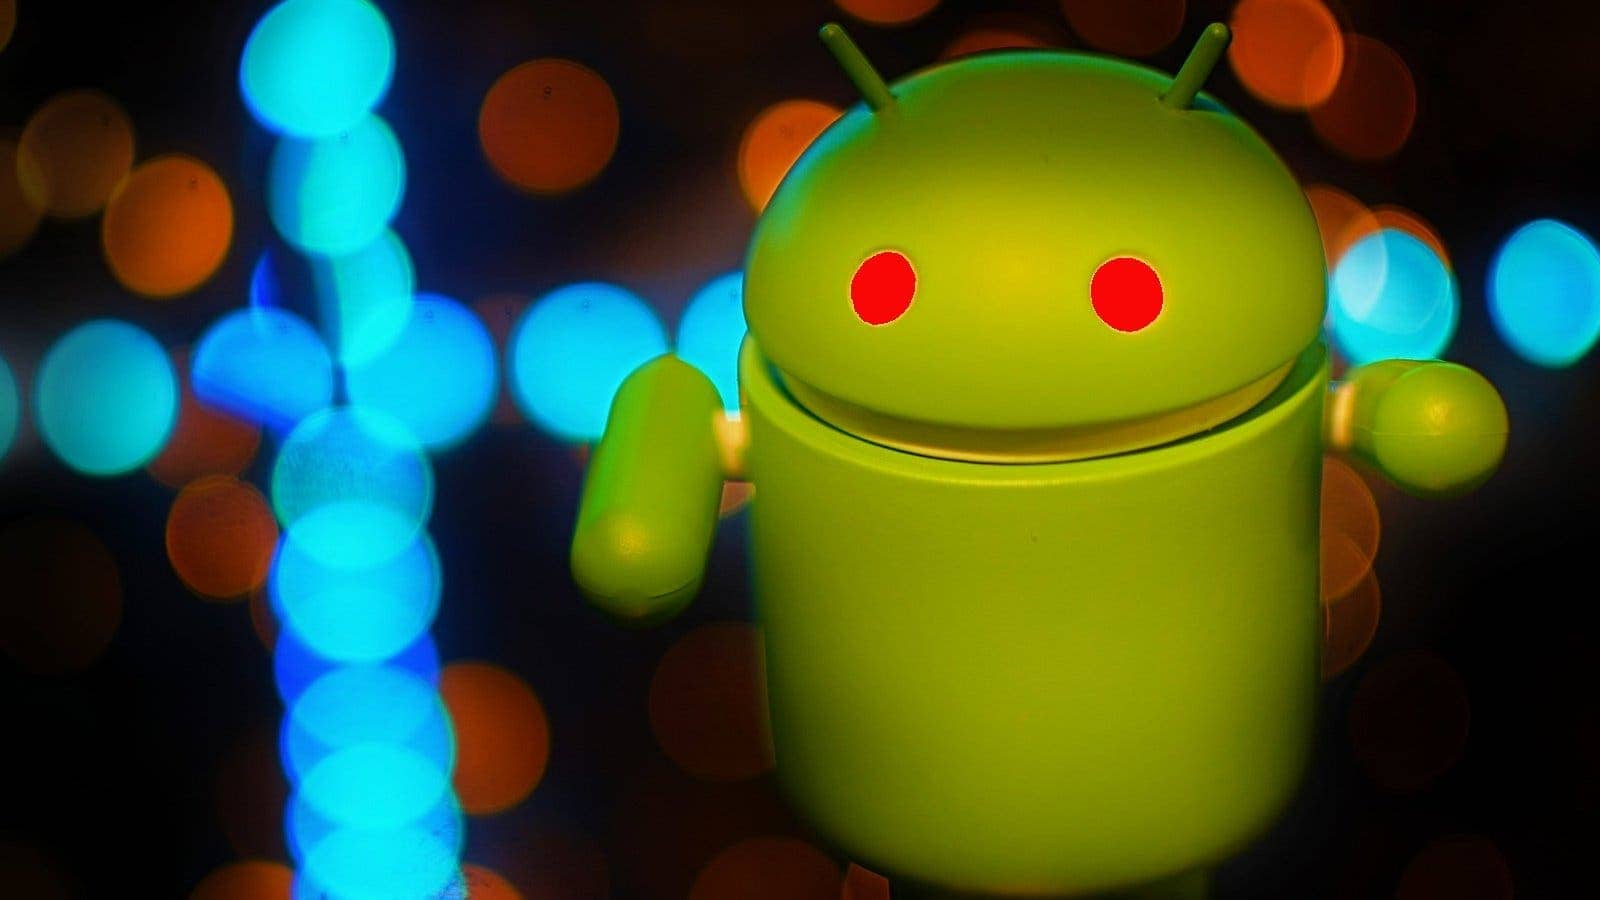 Android Malware BRATA Factor Resets Phone After Stealing Data